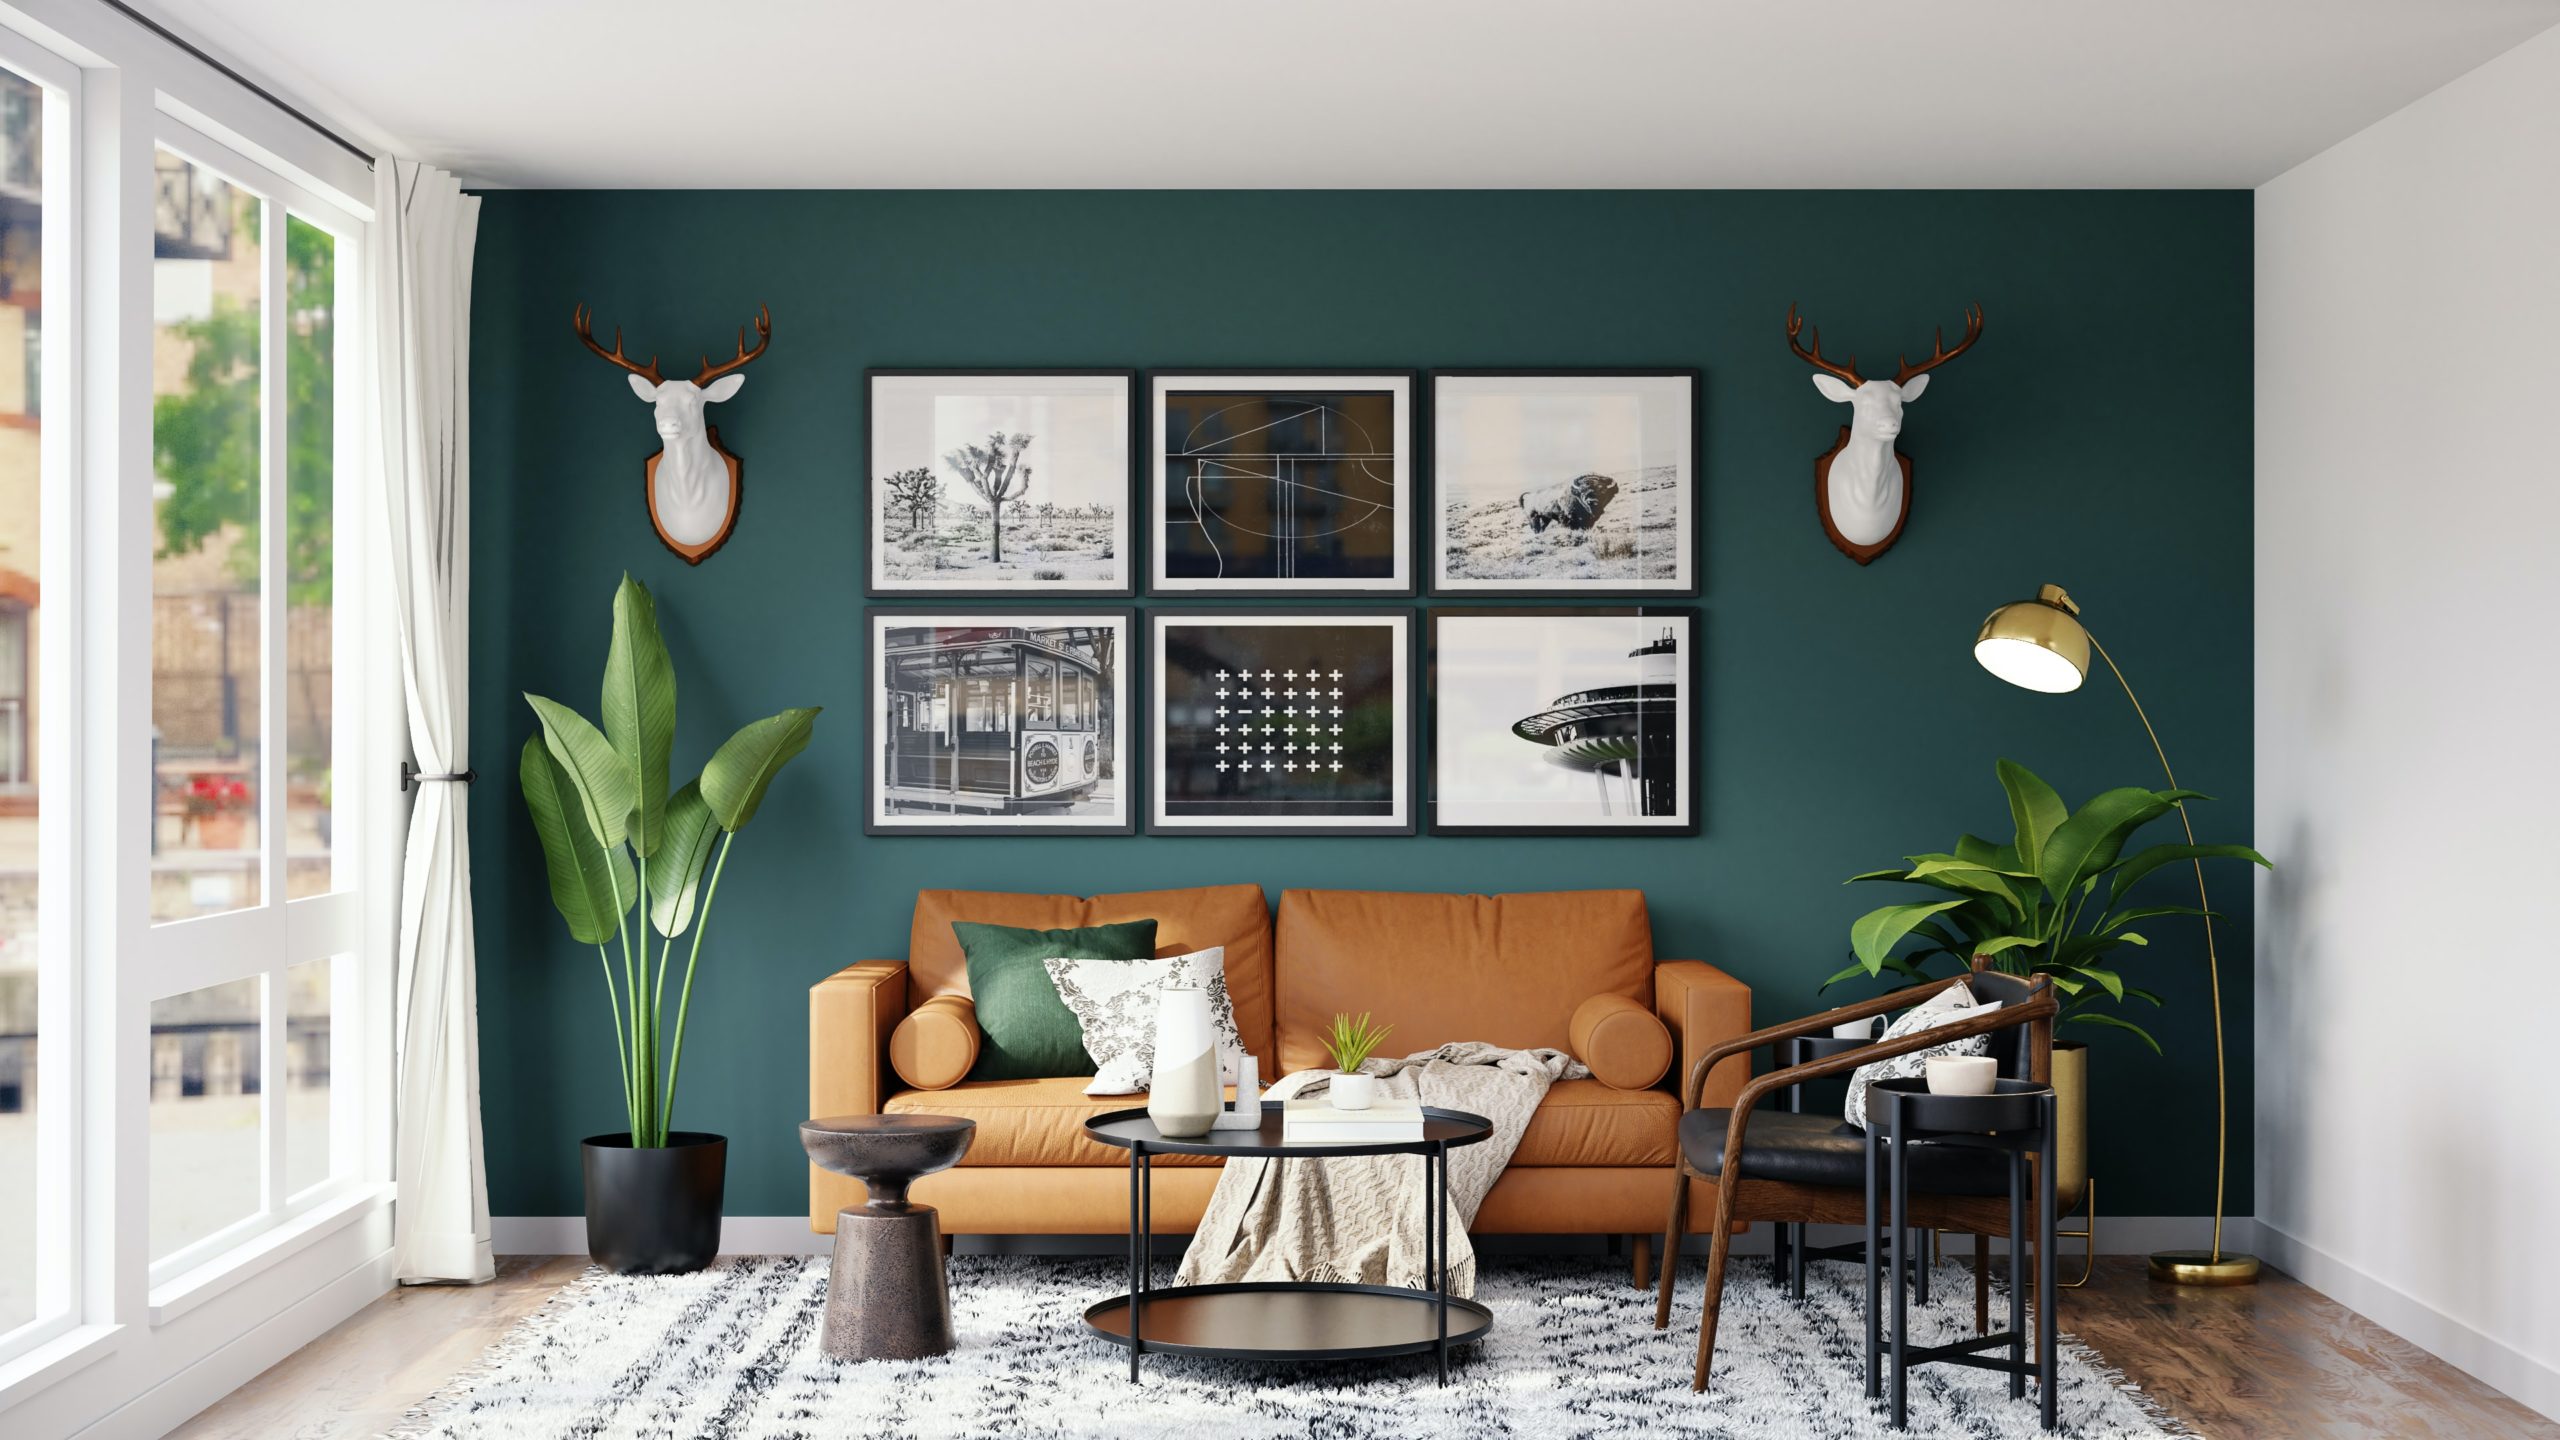 Interior Design for Renters: How to Personalize Your Space without Breaking the Rules